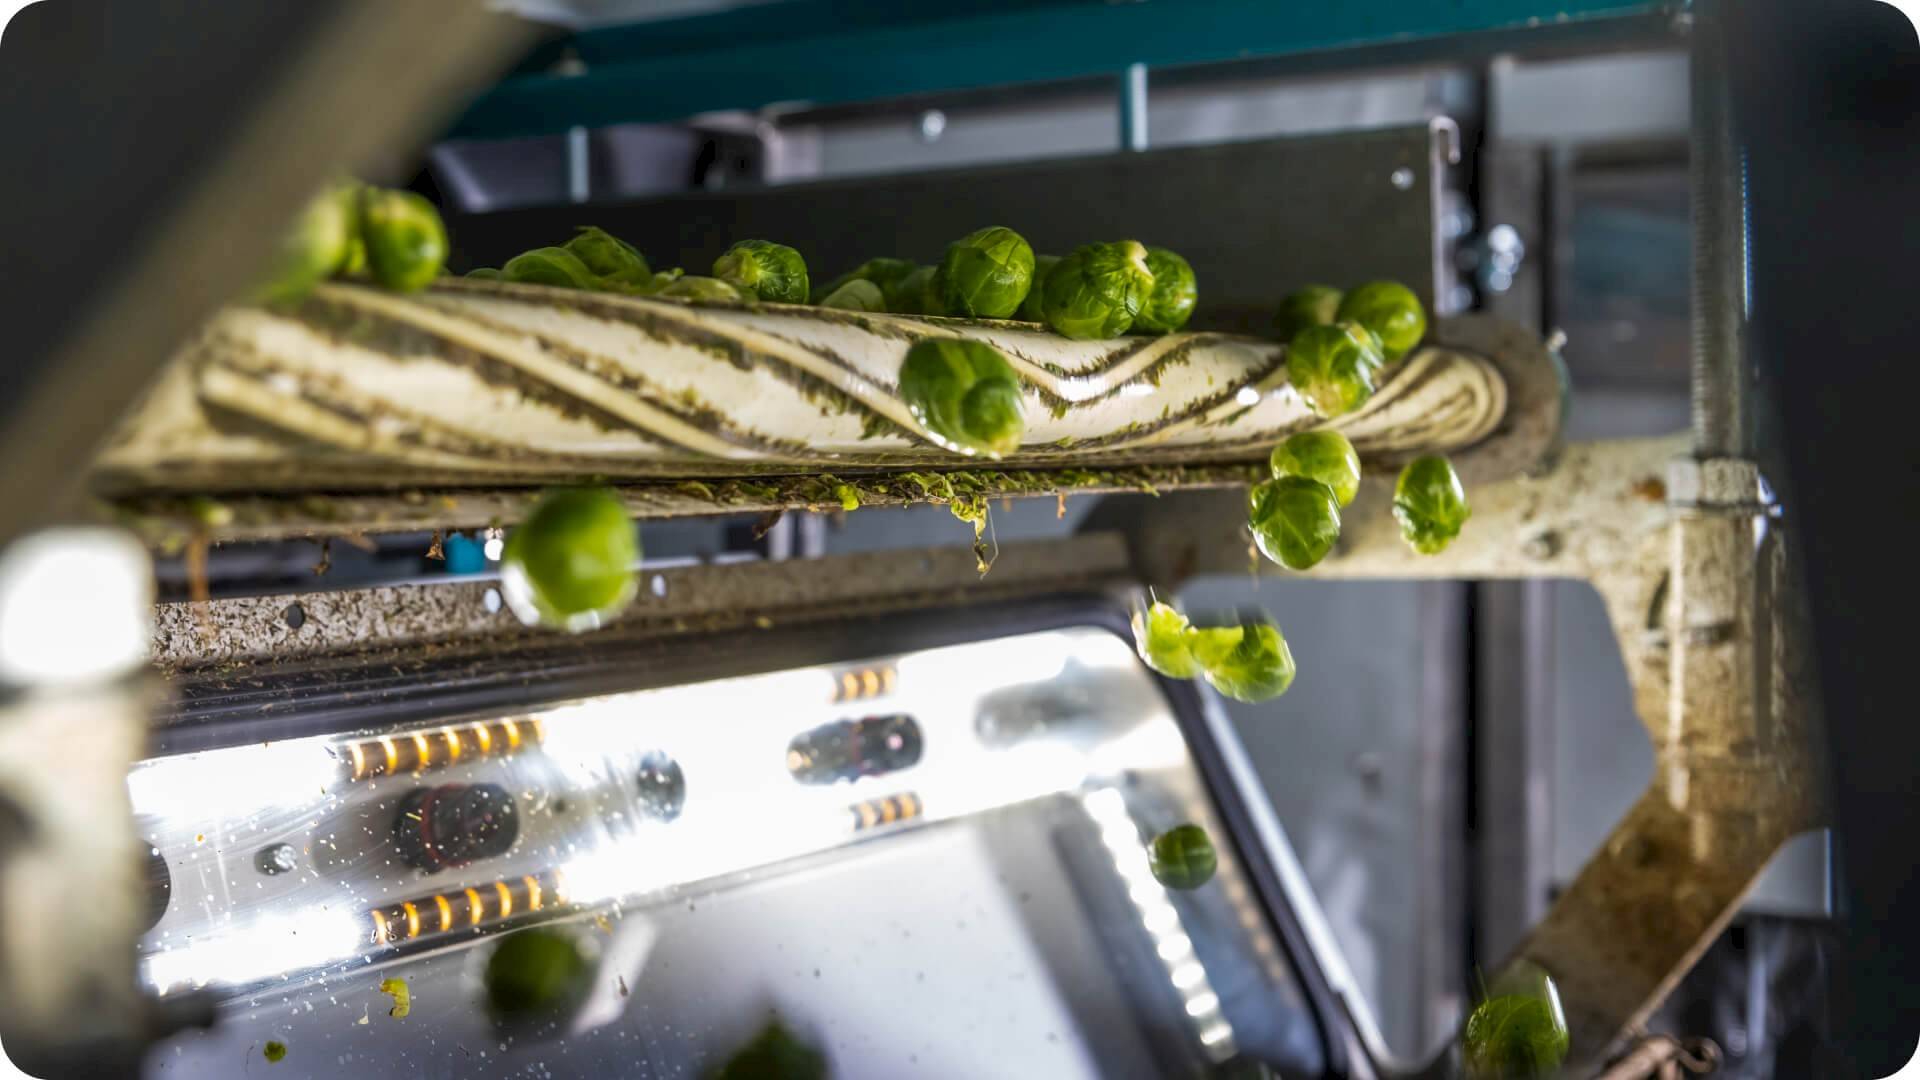 detail of Optisort colour sorter in process of sorting Brussels sprouts - sprouts falling off end of conveyor belt